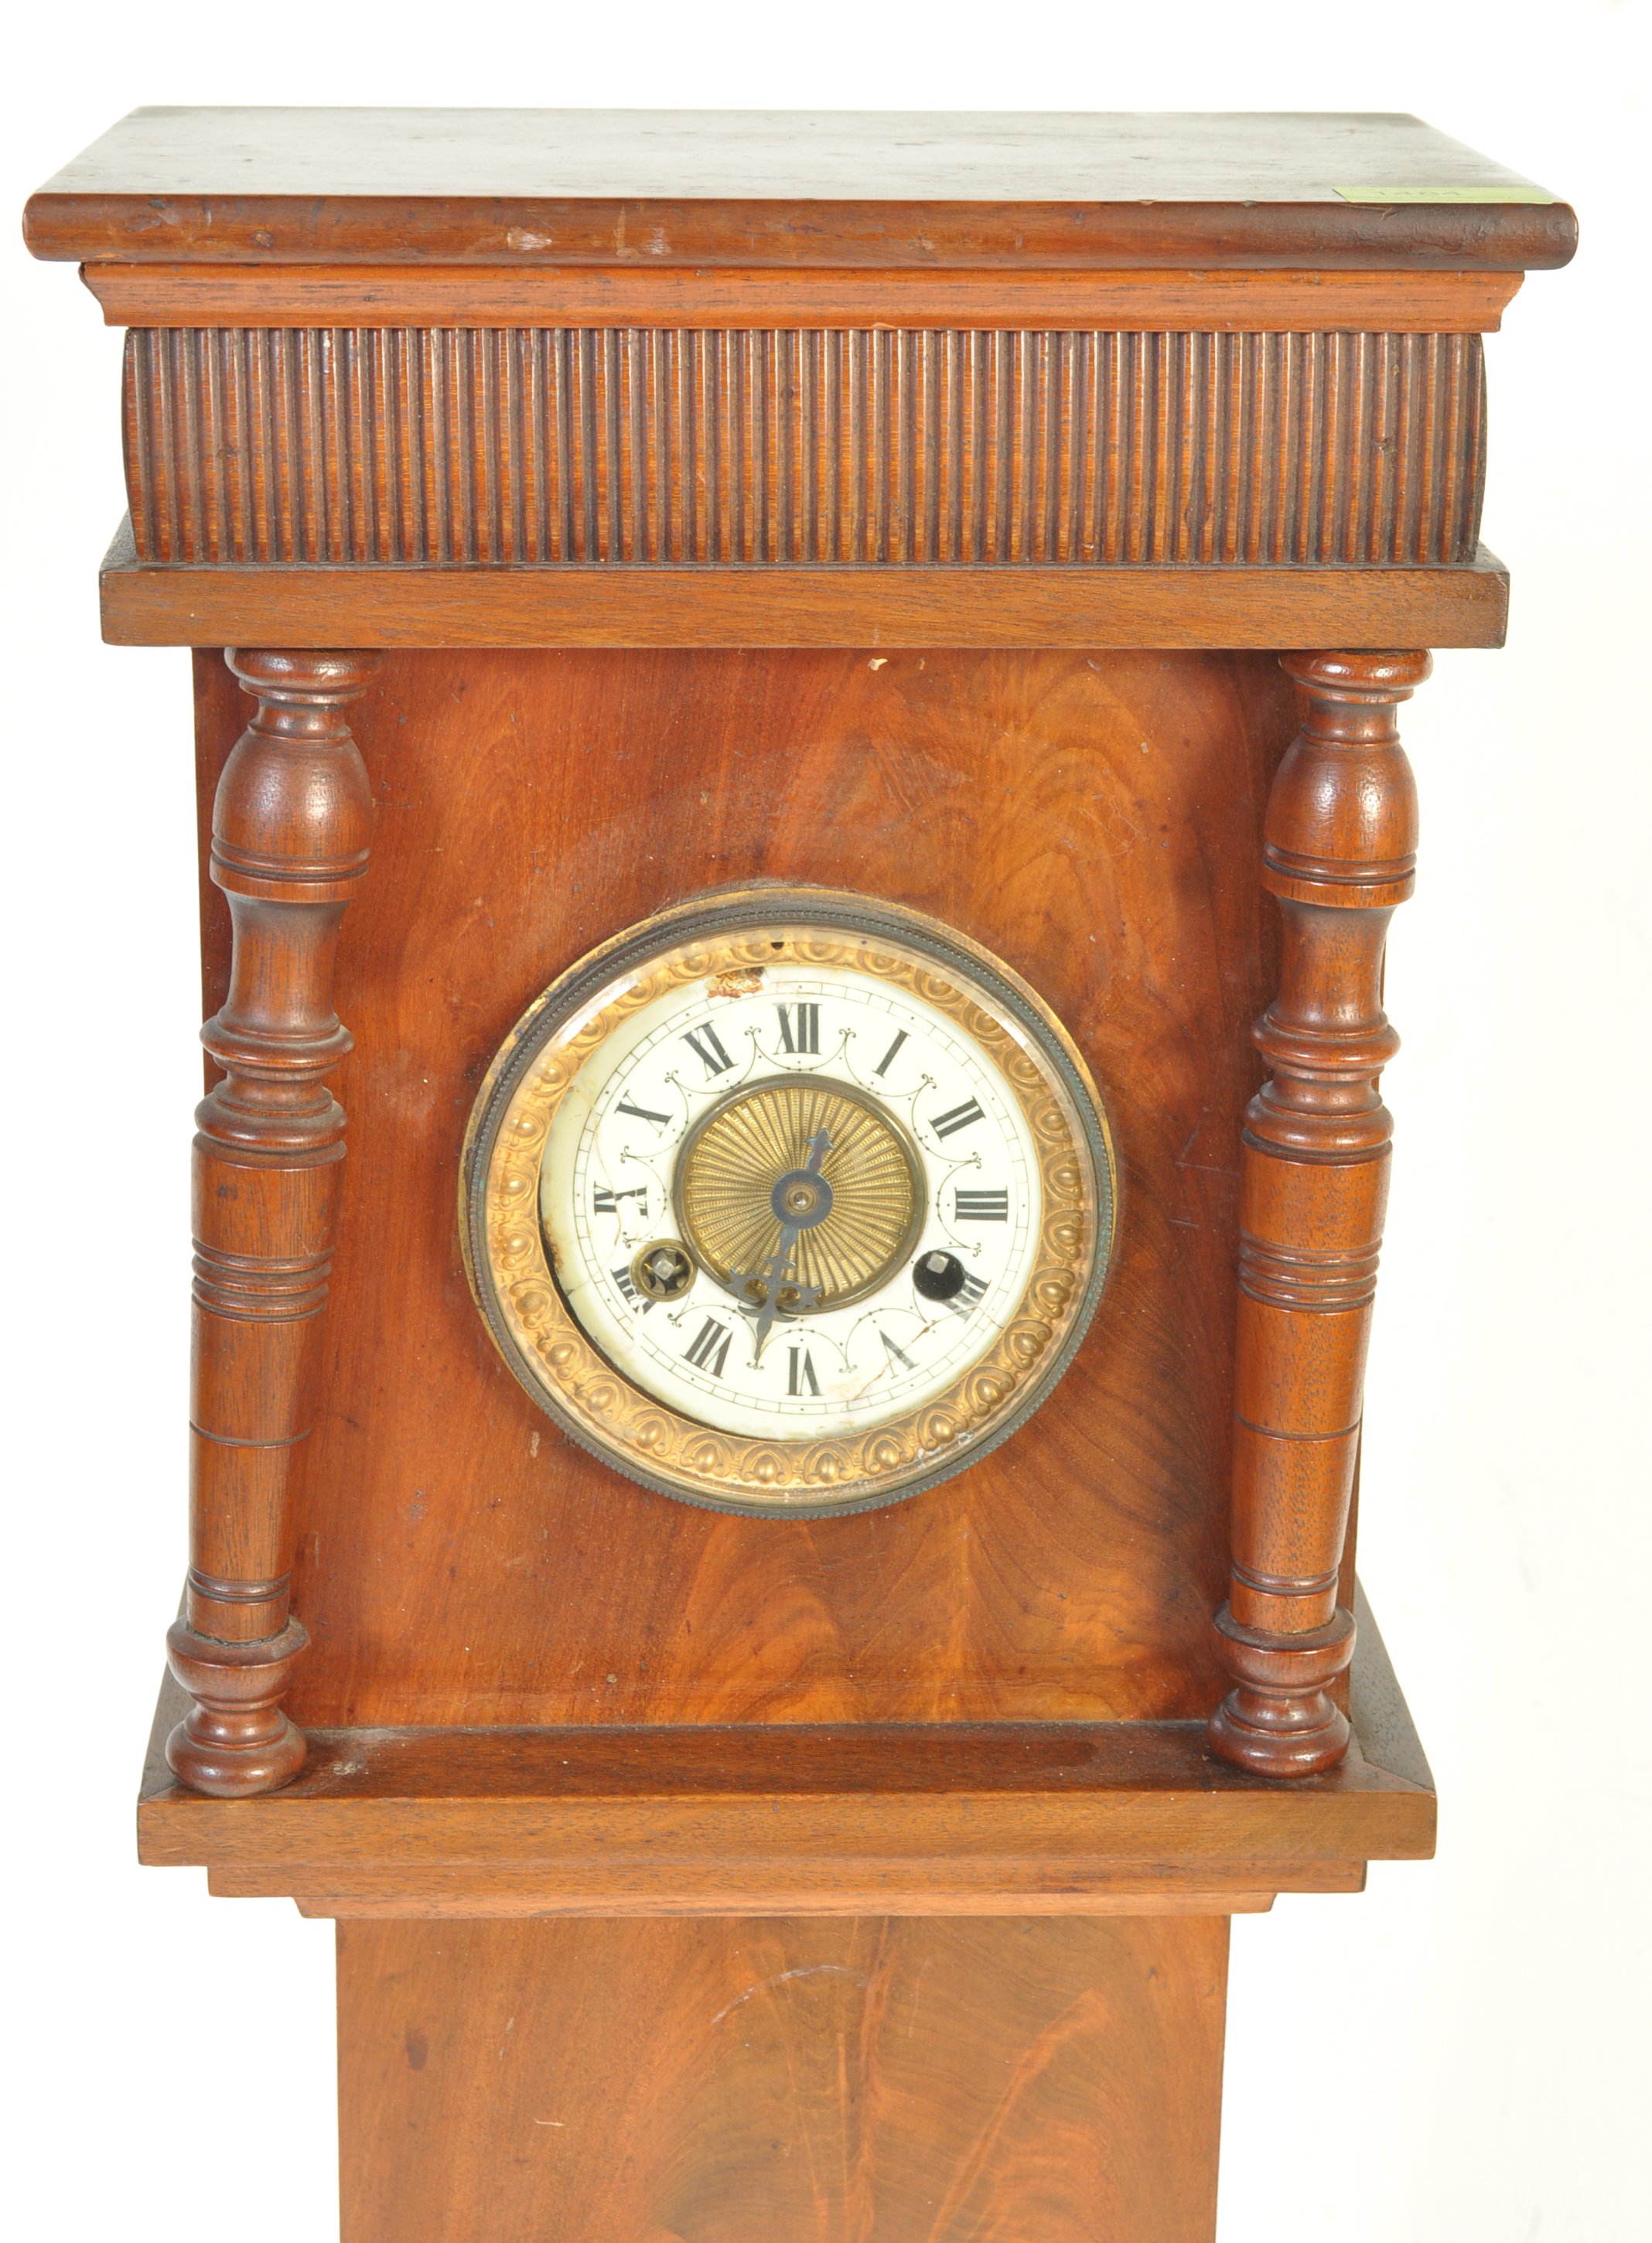 EARLY 20TH CENTURY JUNGHANS GRANDDAUGHTER CLOCK - Image 2 of 6